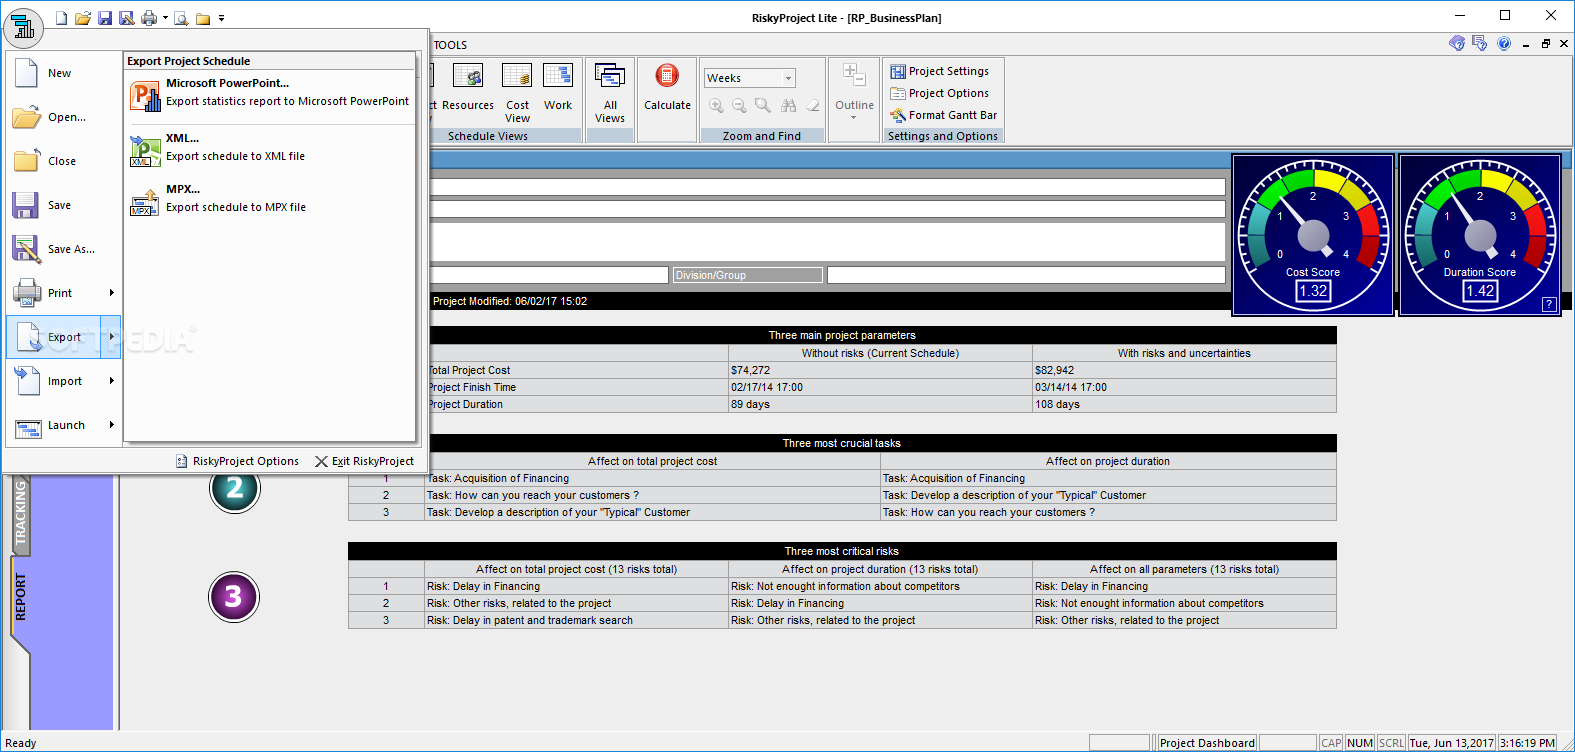 tally erp 9 gold unlimited edition with crack free download